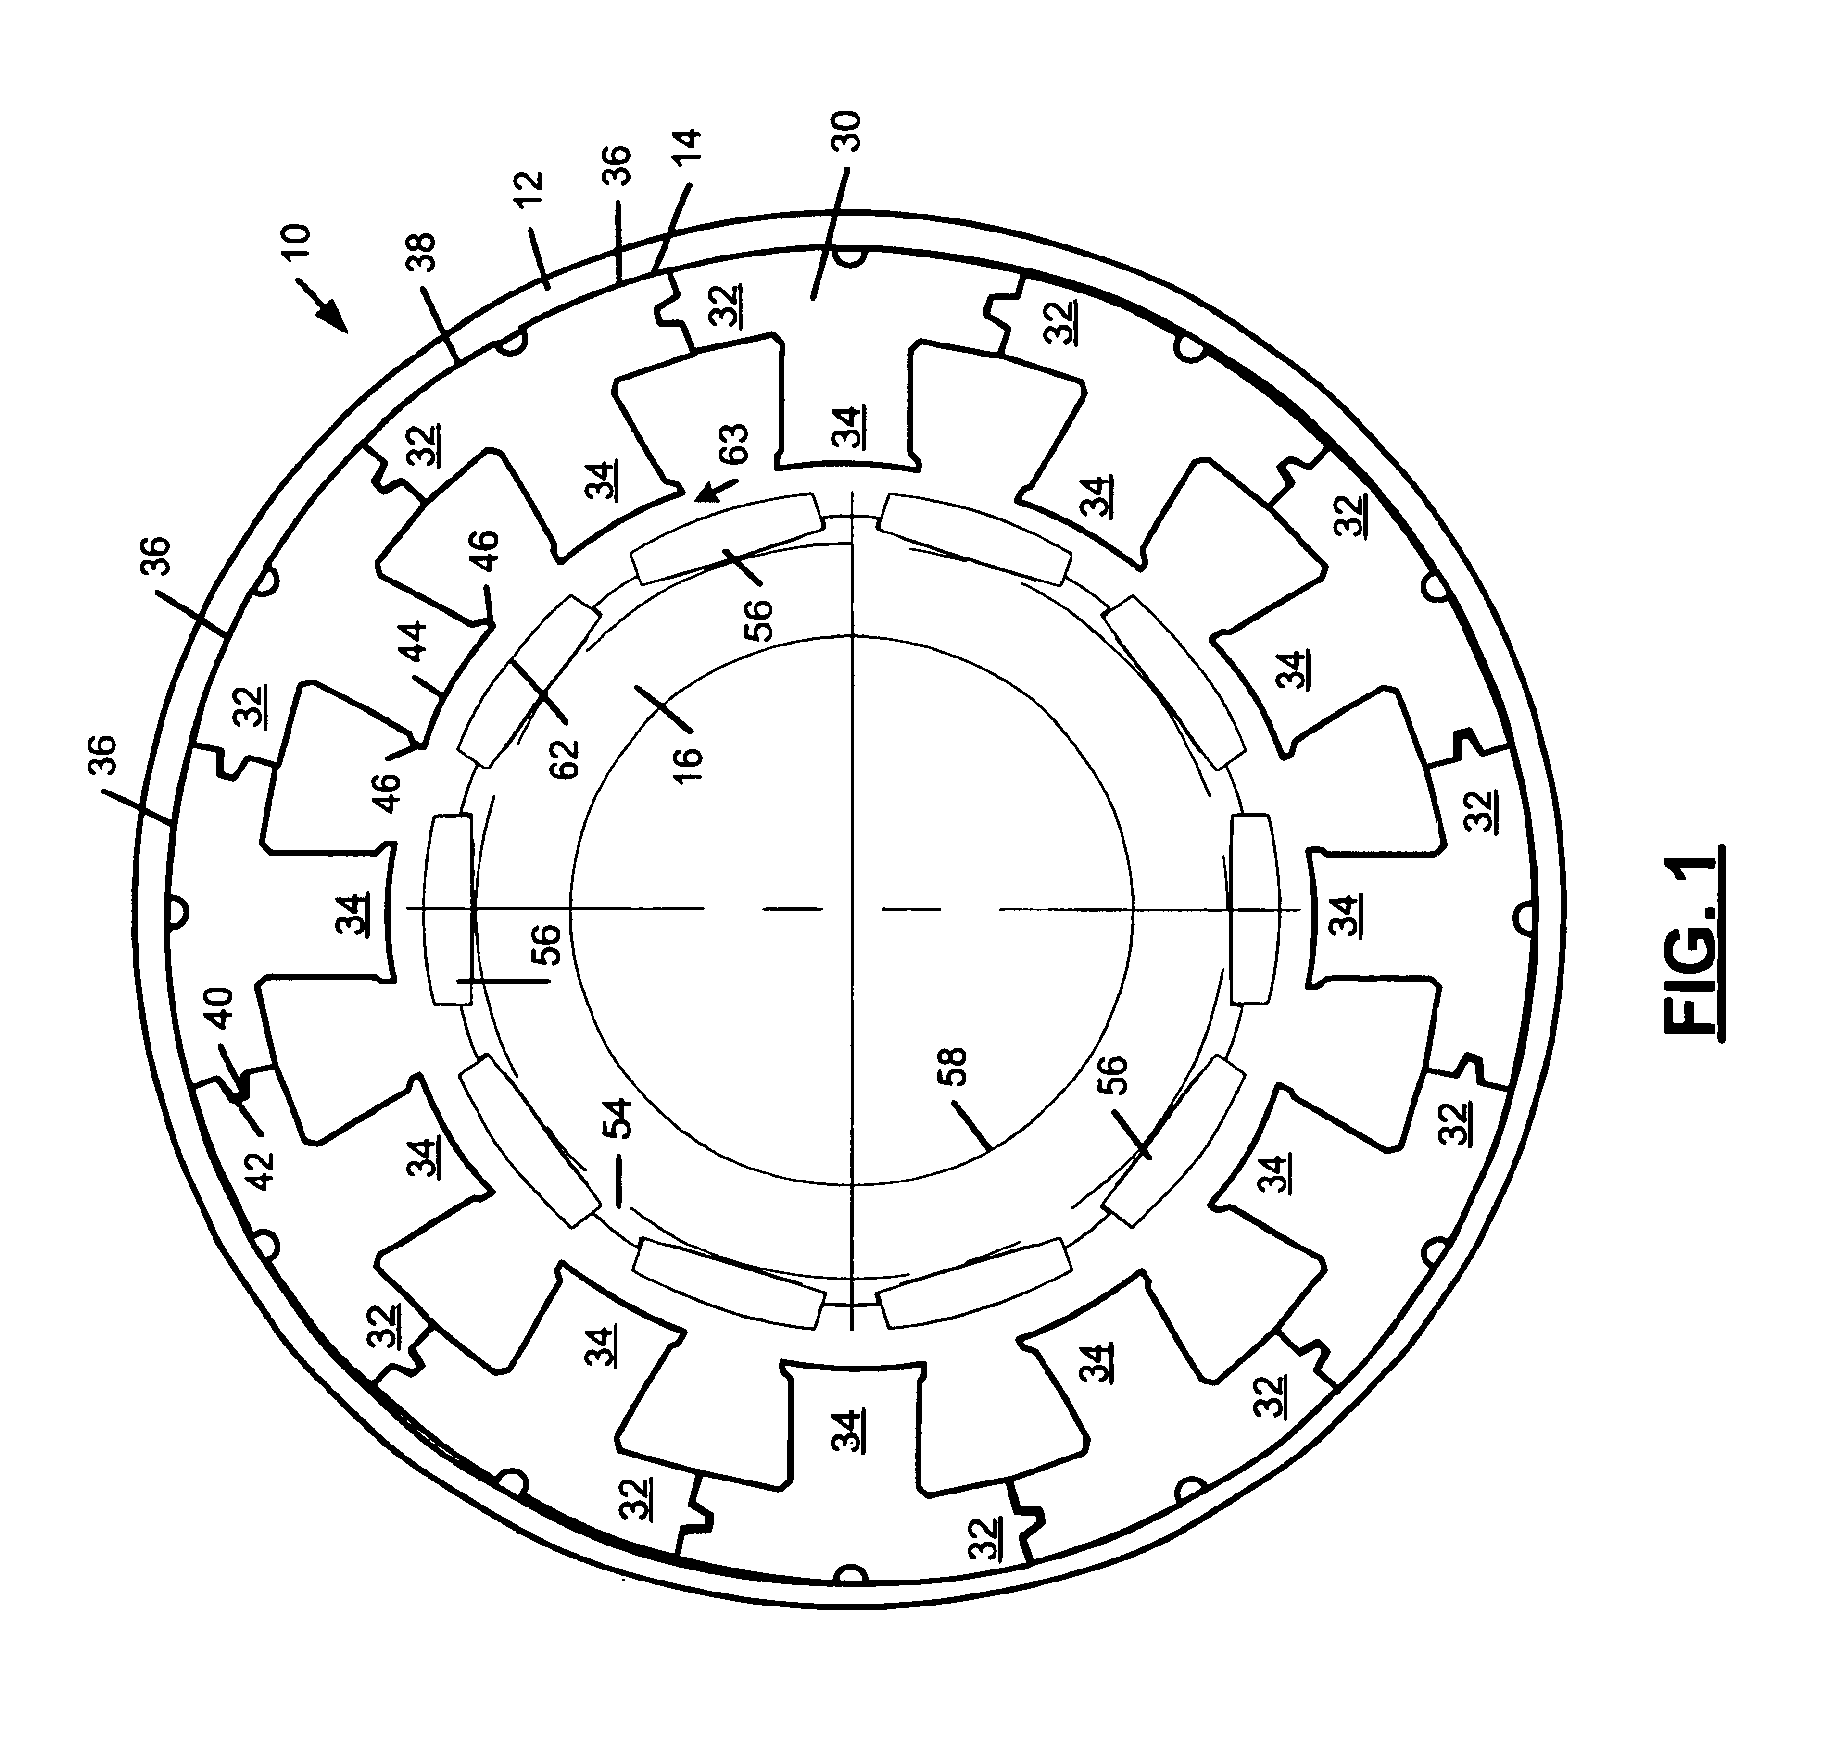 Interconnecting method for segmented stator electric machines